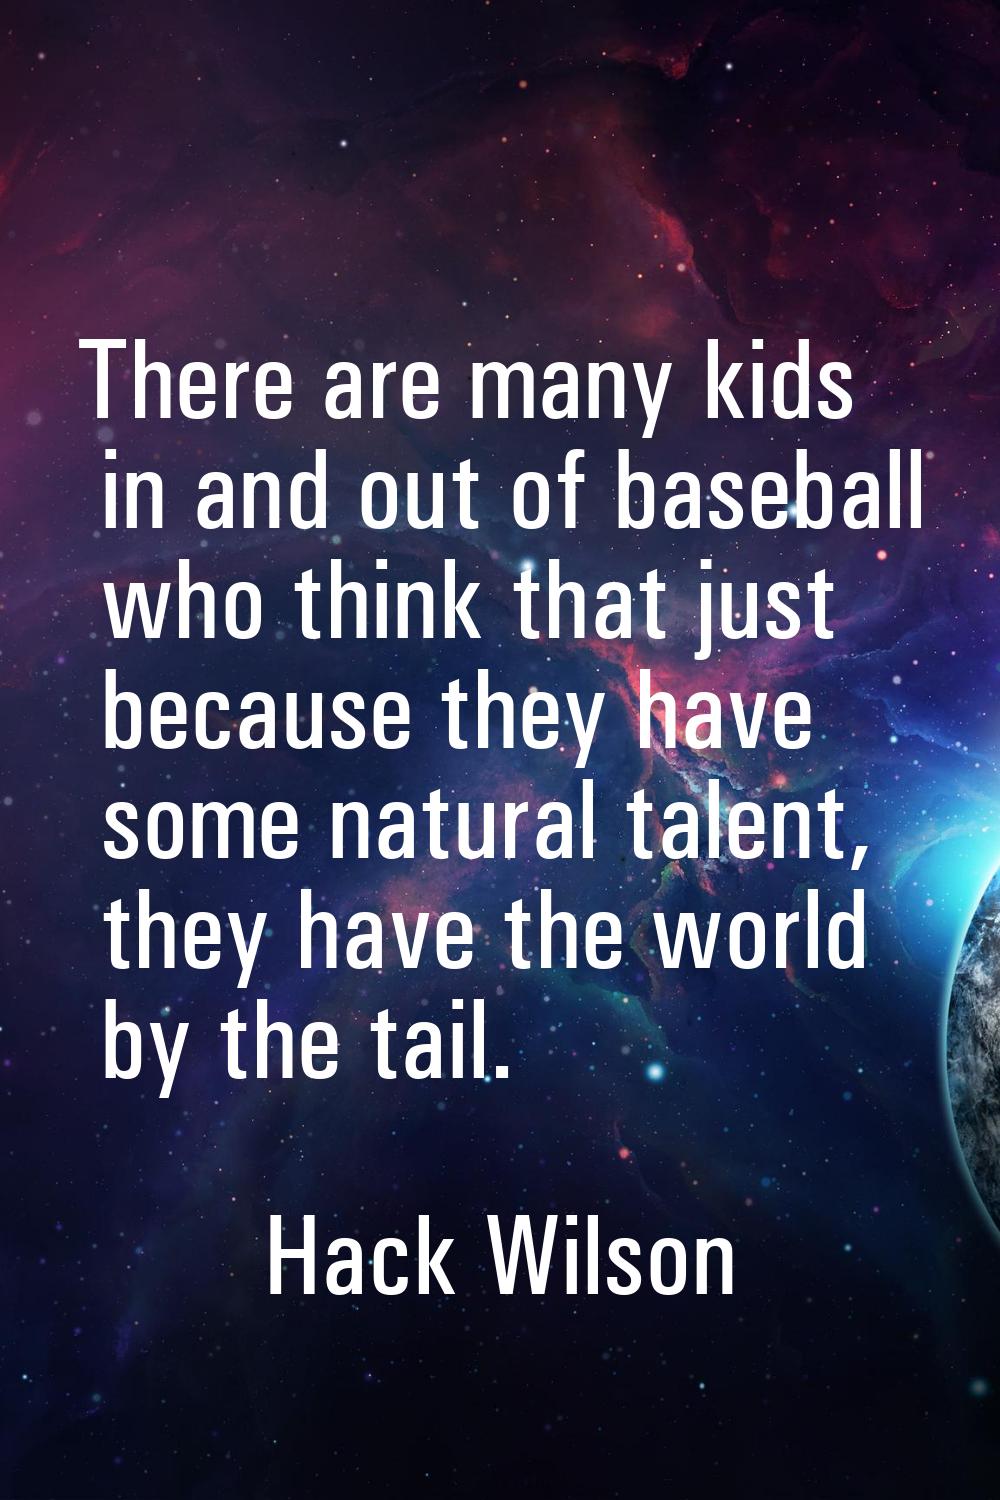 There are many kids in and out of baseball who think that just because they have some natural talen